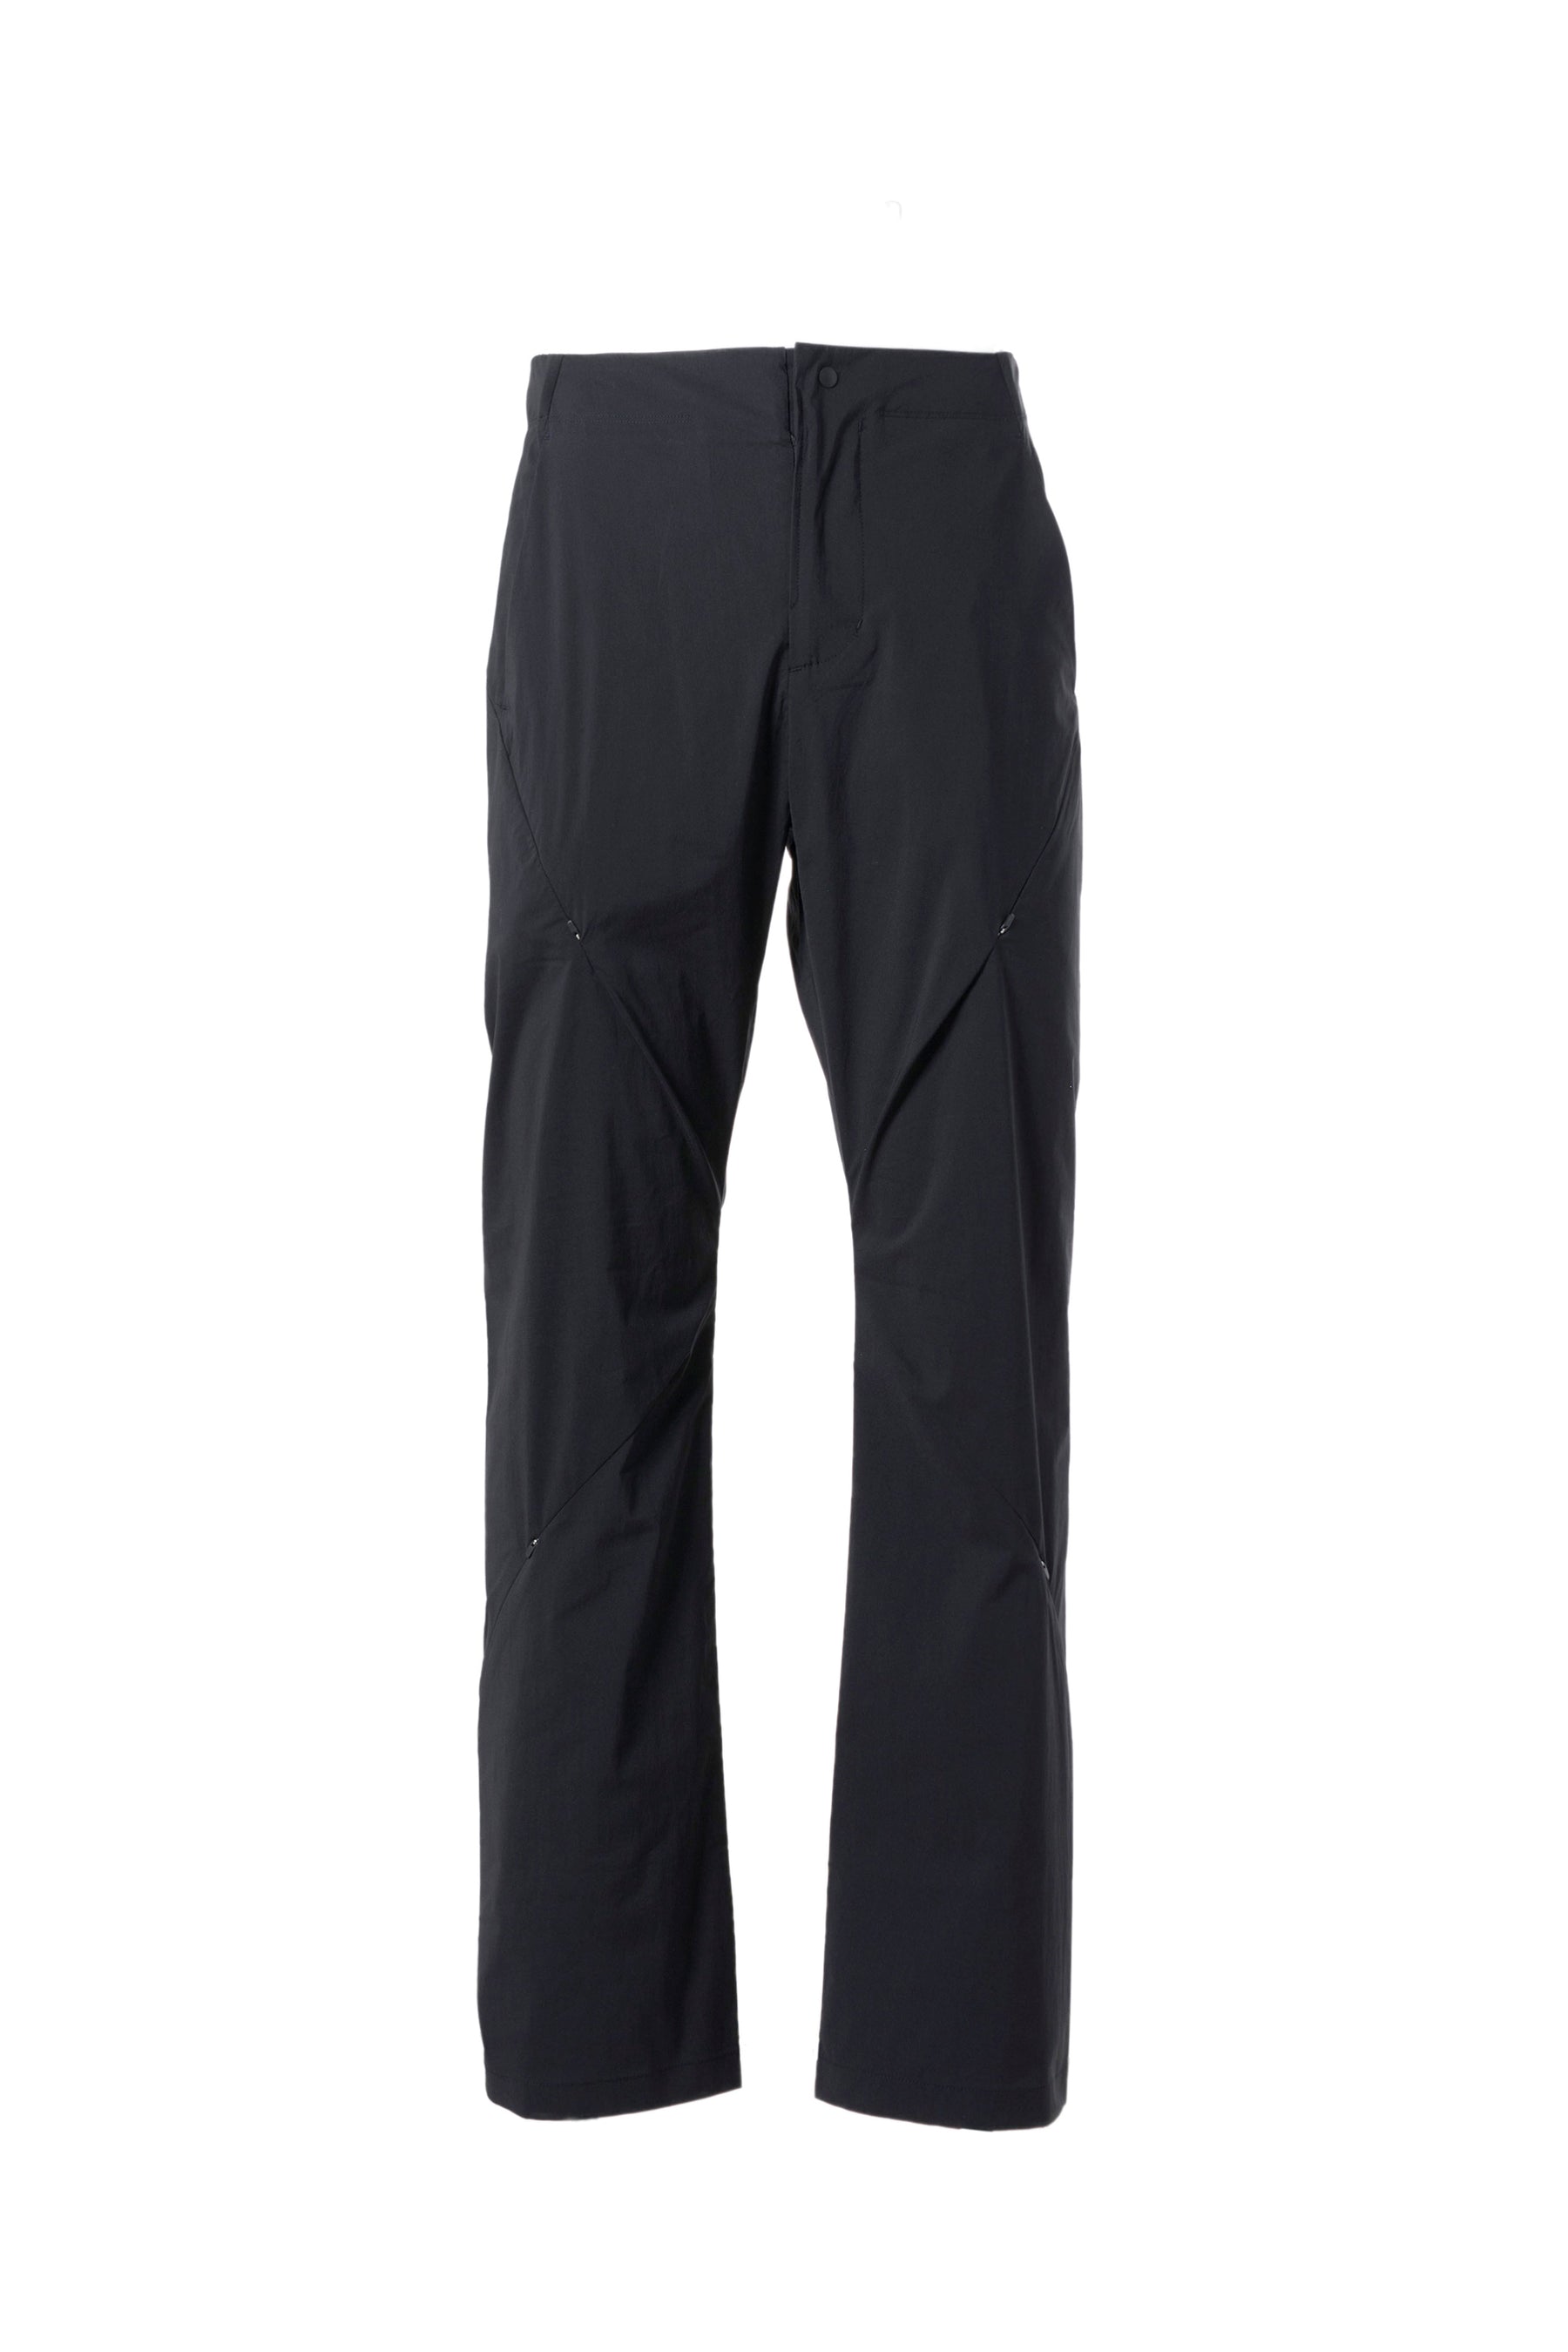 POST ARCHIVE FACTION SS23 5.0+ TECHNICAL PANTS RIGHT / BLK -NUBIAN